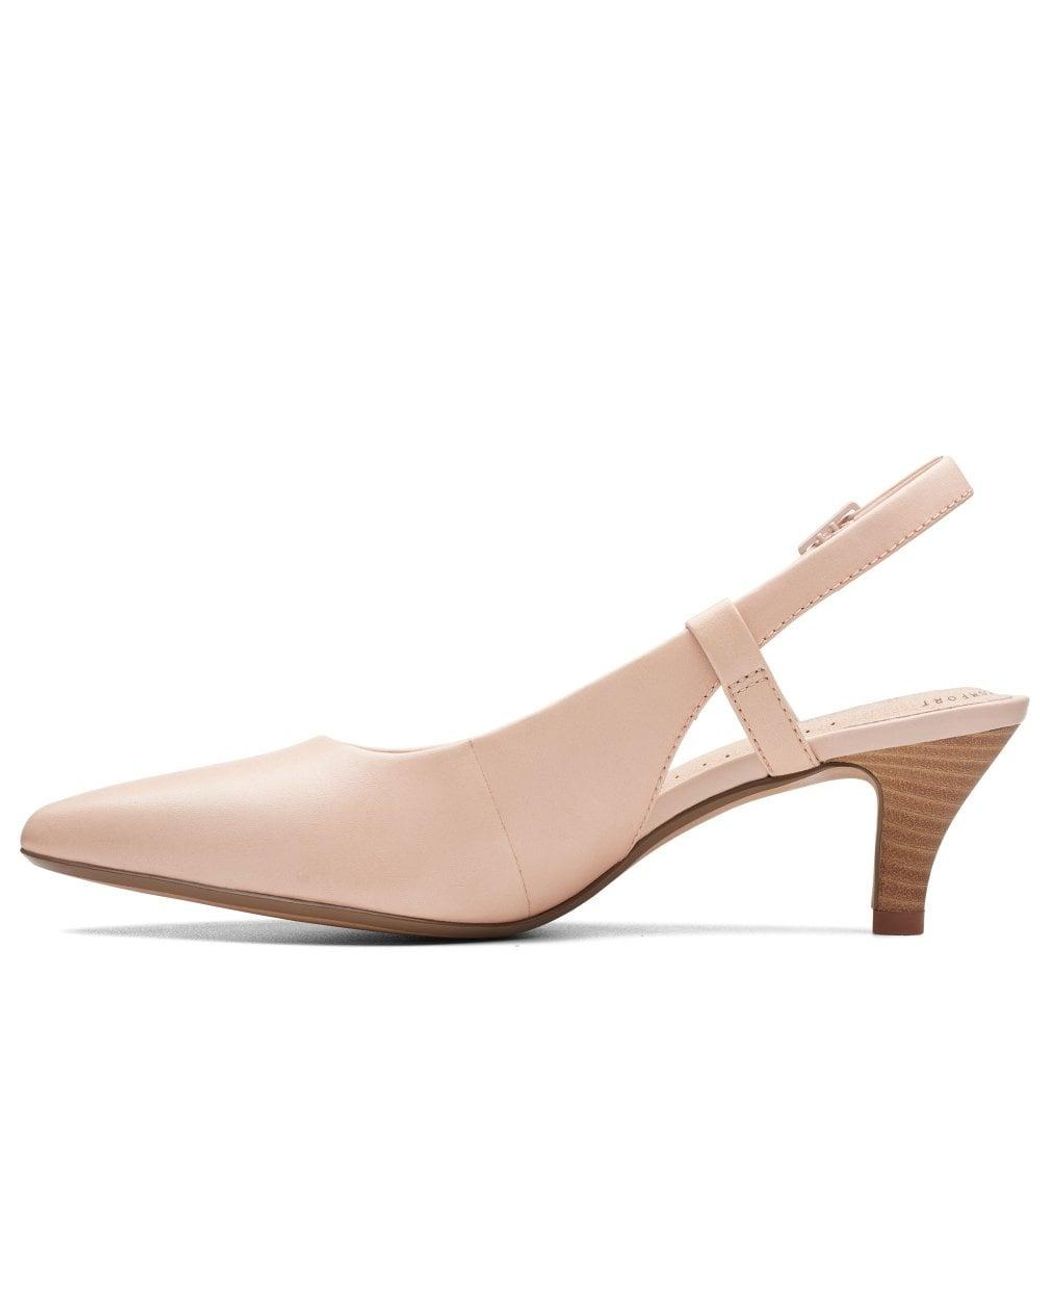 Clarks Linvale Loop Womens Slingback Shoes in Pink | Lyst Australia